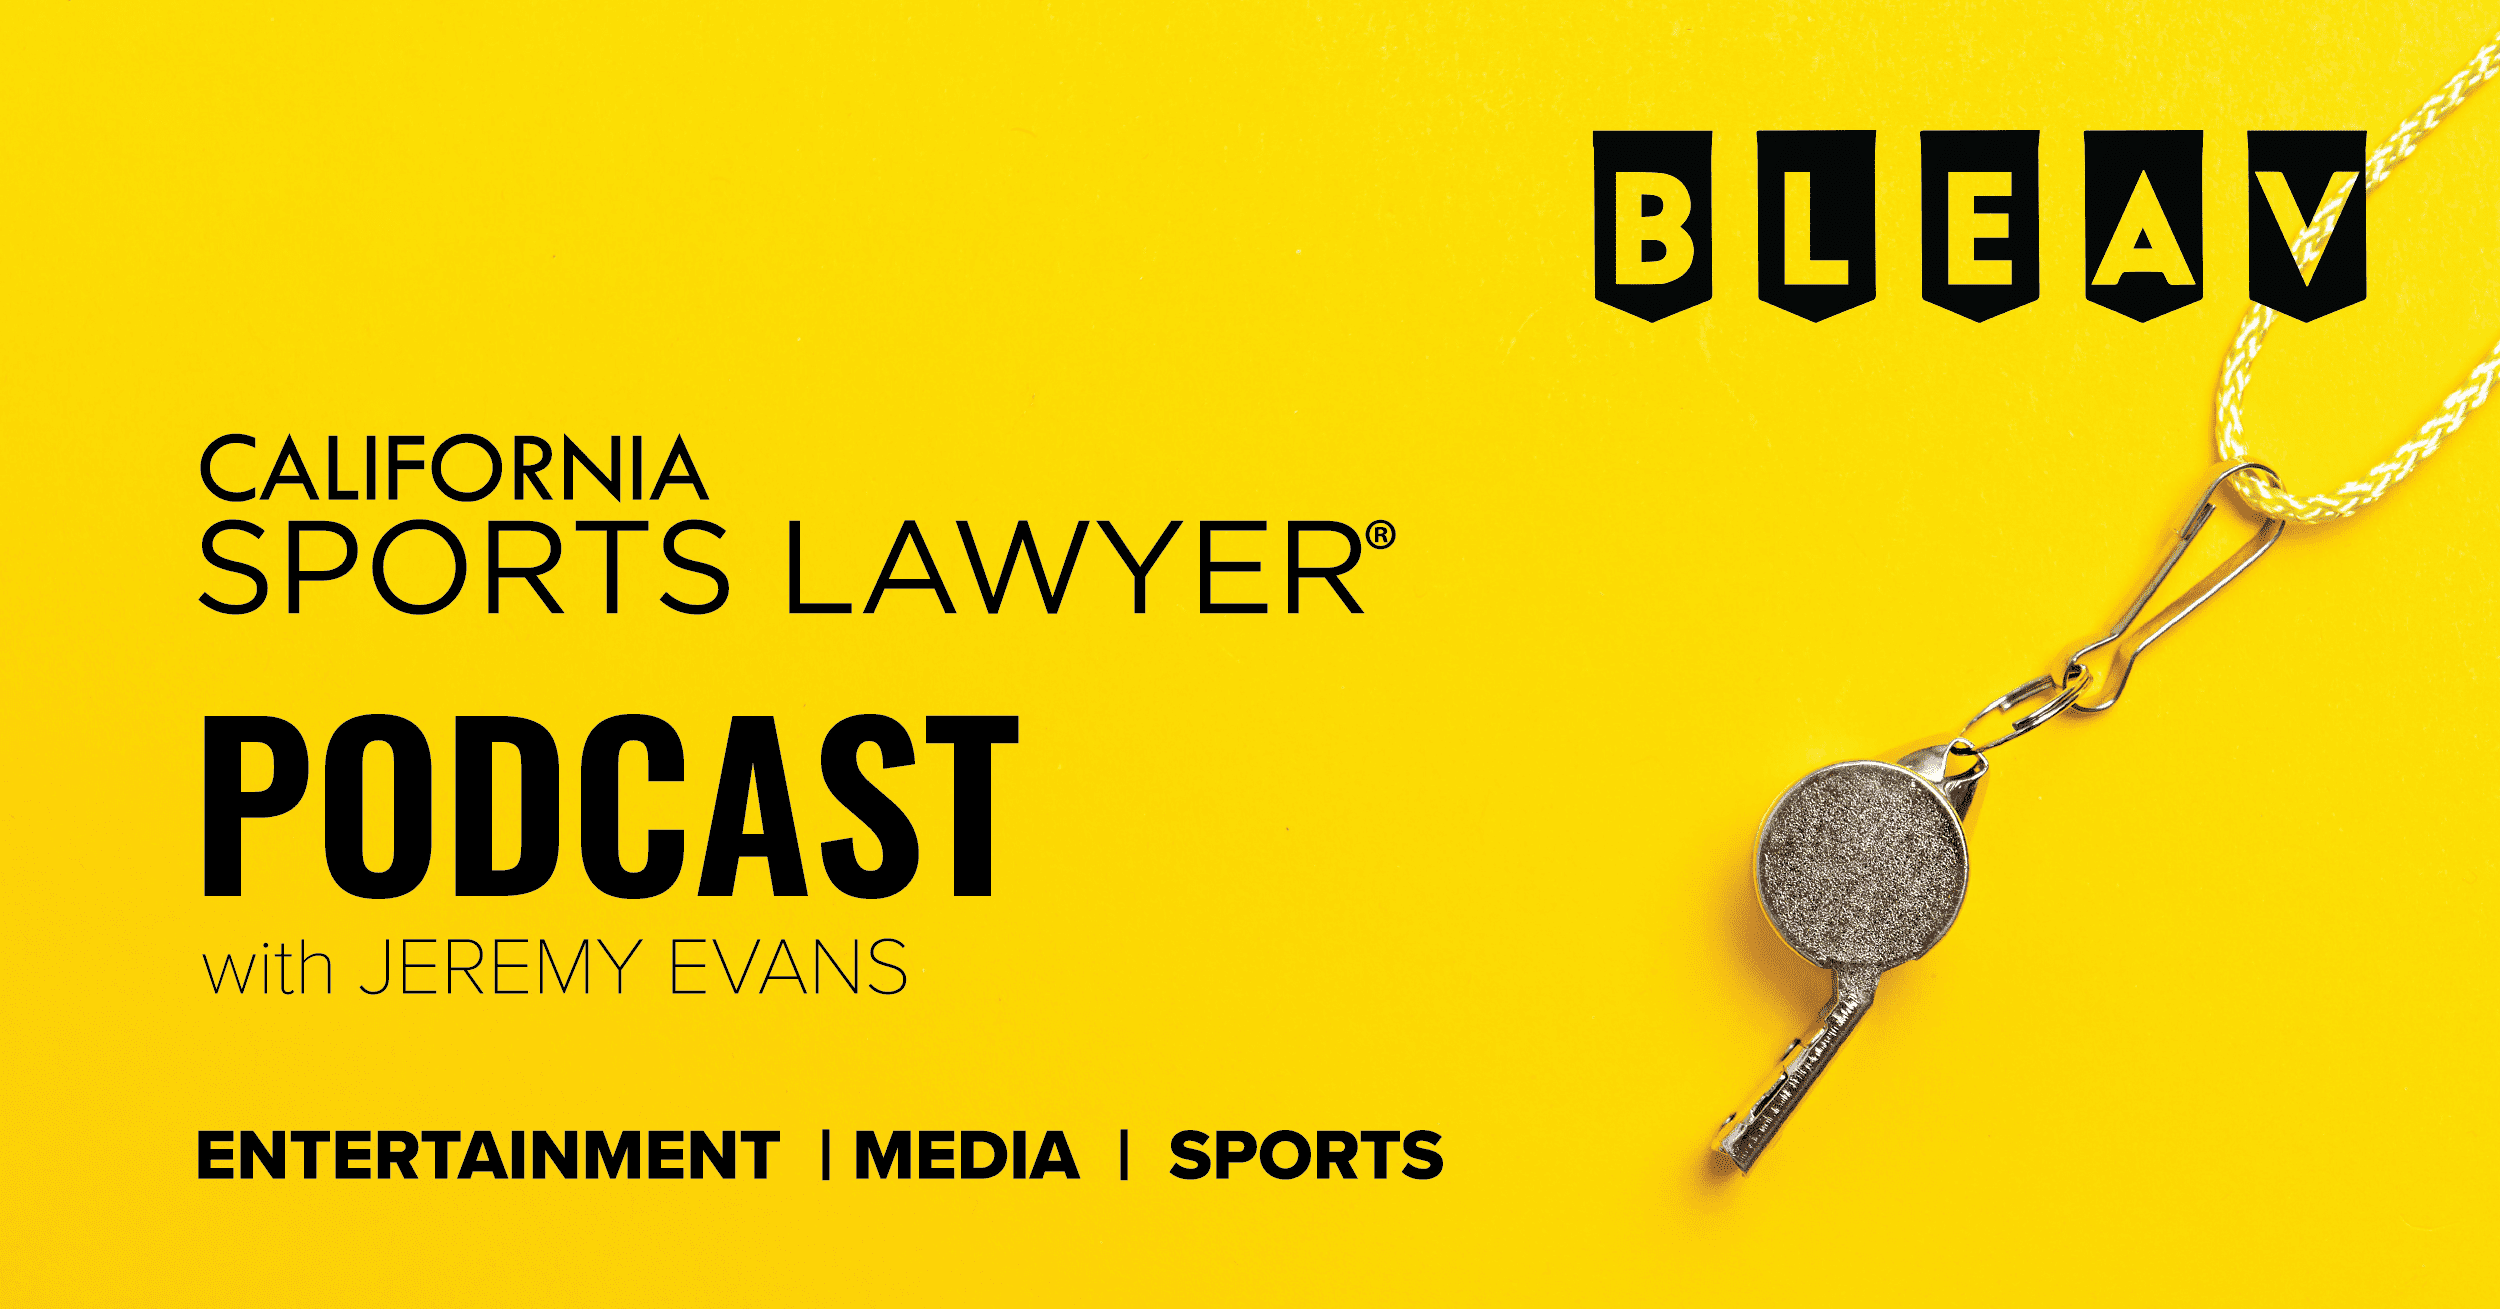 California Sports Lawyer® Podcast with Jeremy Evans: Finding New Ways to Deliver Content